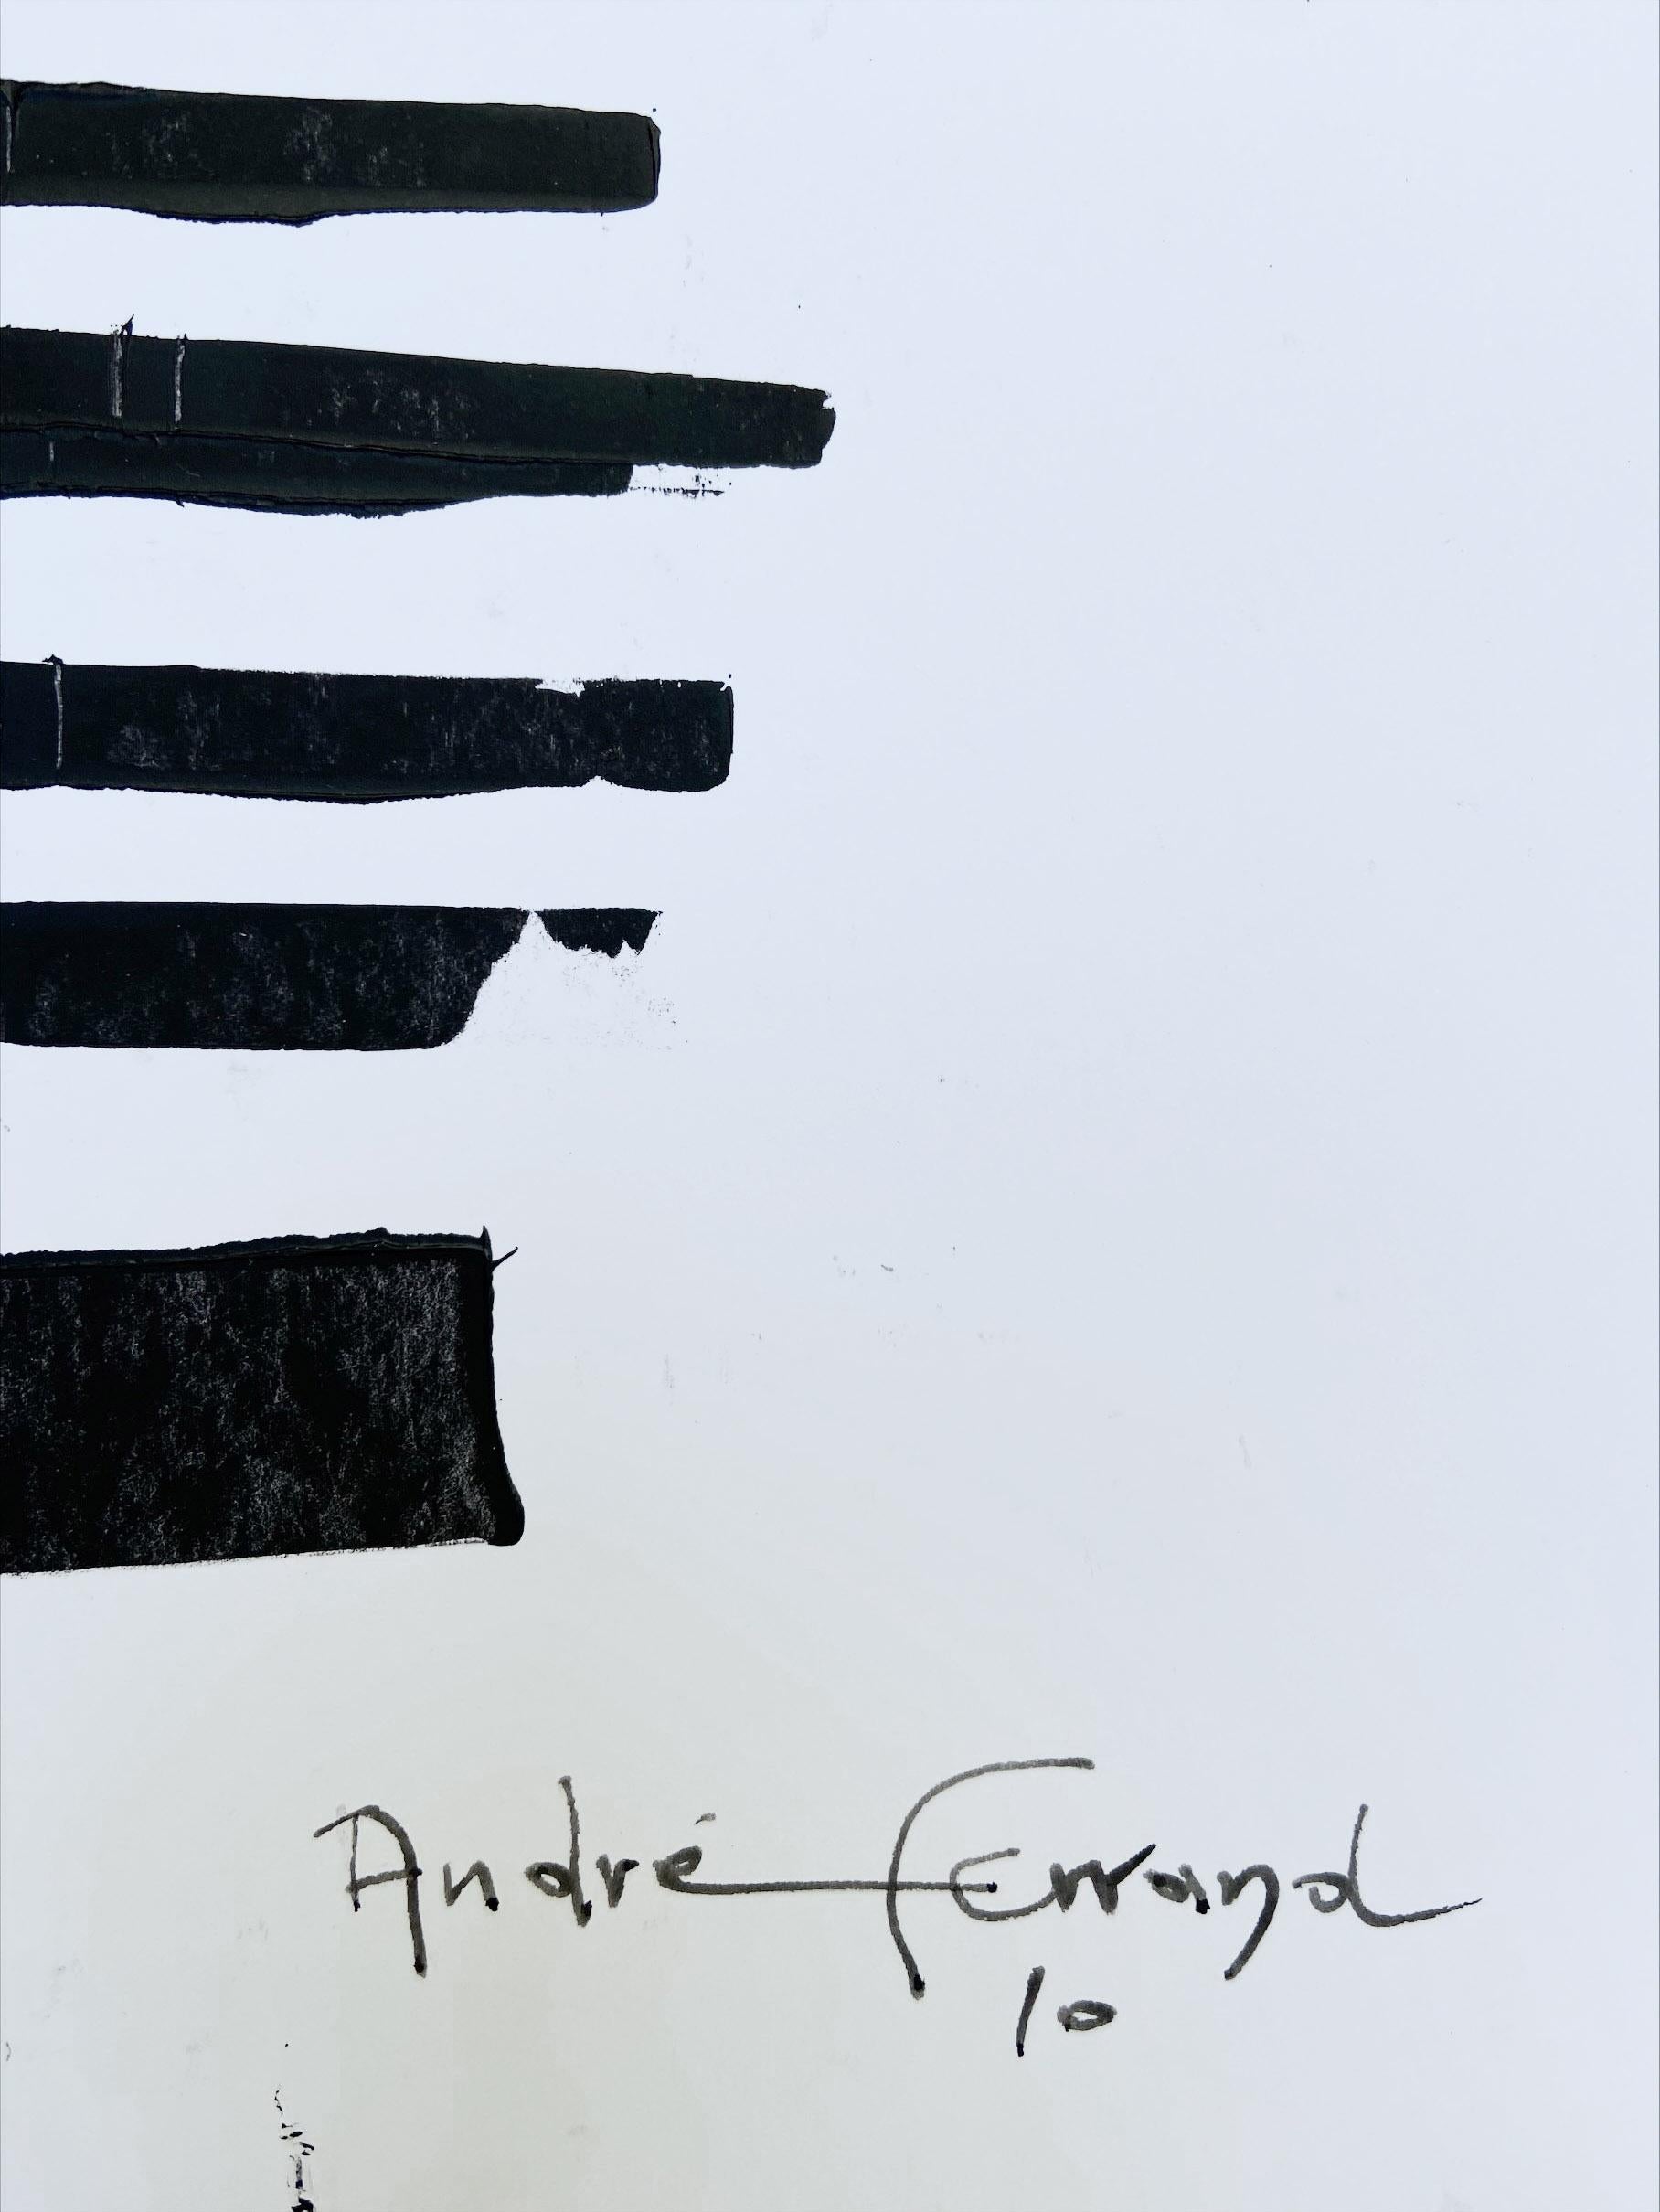 André Ferrand - Composition 5 
51x65
India ink on paper 
Signed on the back 
Circa 2010
390€